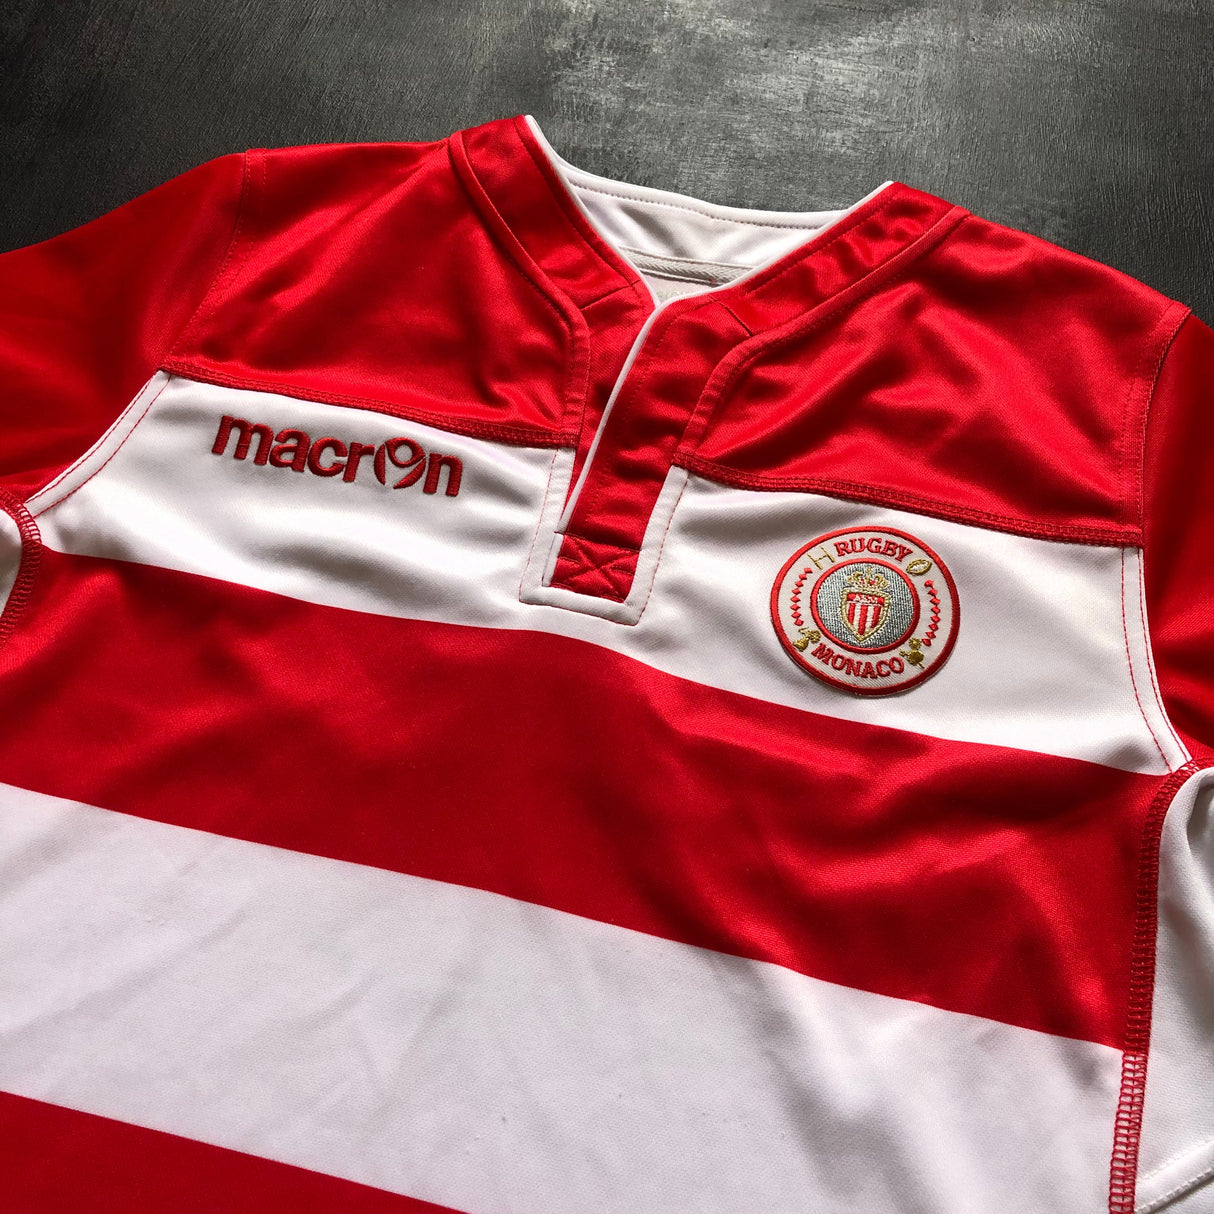 AS Monaco Rugby Team Jersey 2014 Medium Underdog Rugby - The Tier 2 Rugby Shop 